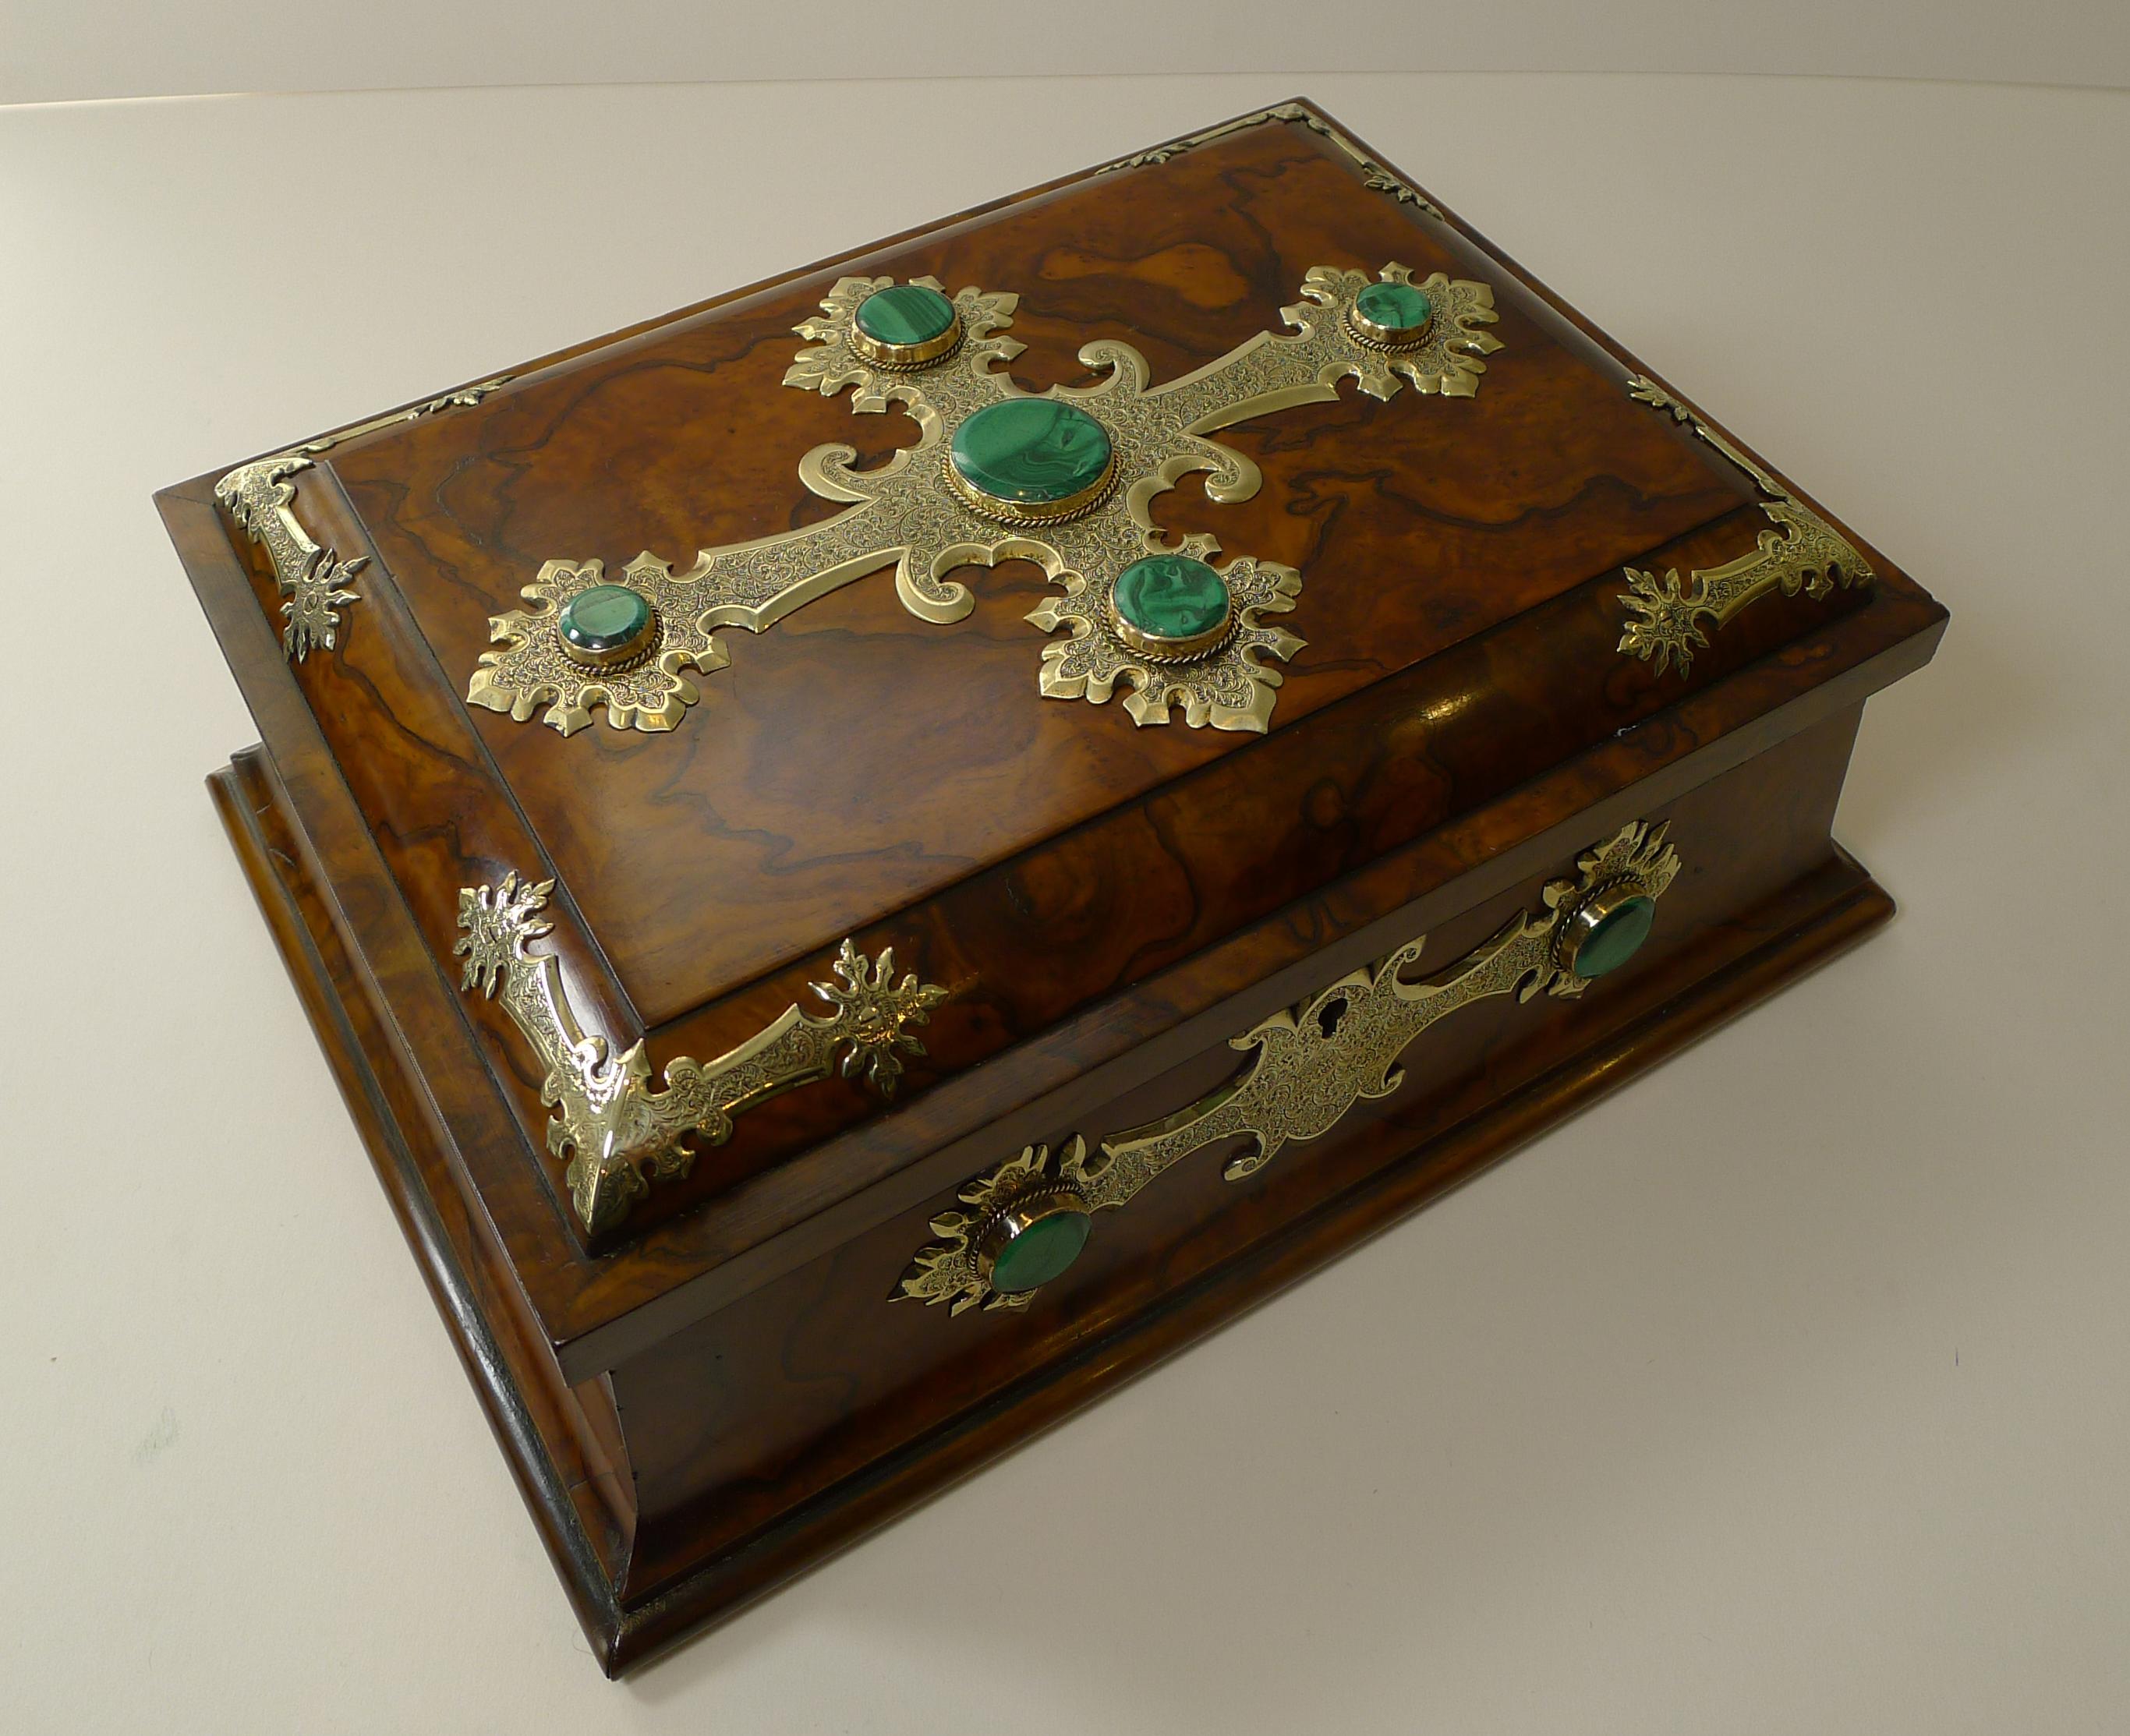 A stunning English Victorian Games / playing card box made from Burl Walnut mounted with impressive polished brass mounts beautifully detailed, and in turn, inset with polished green malachite stones.

The box comes with a working (replacement)